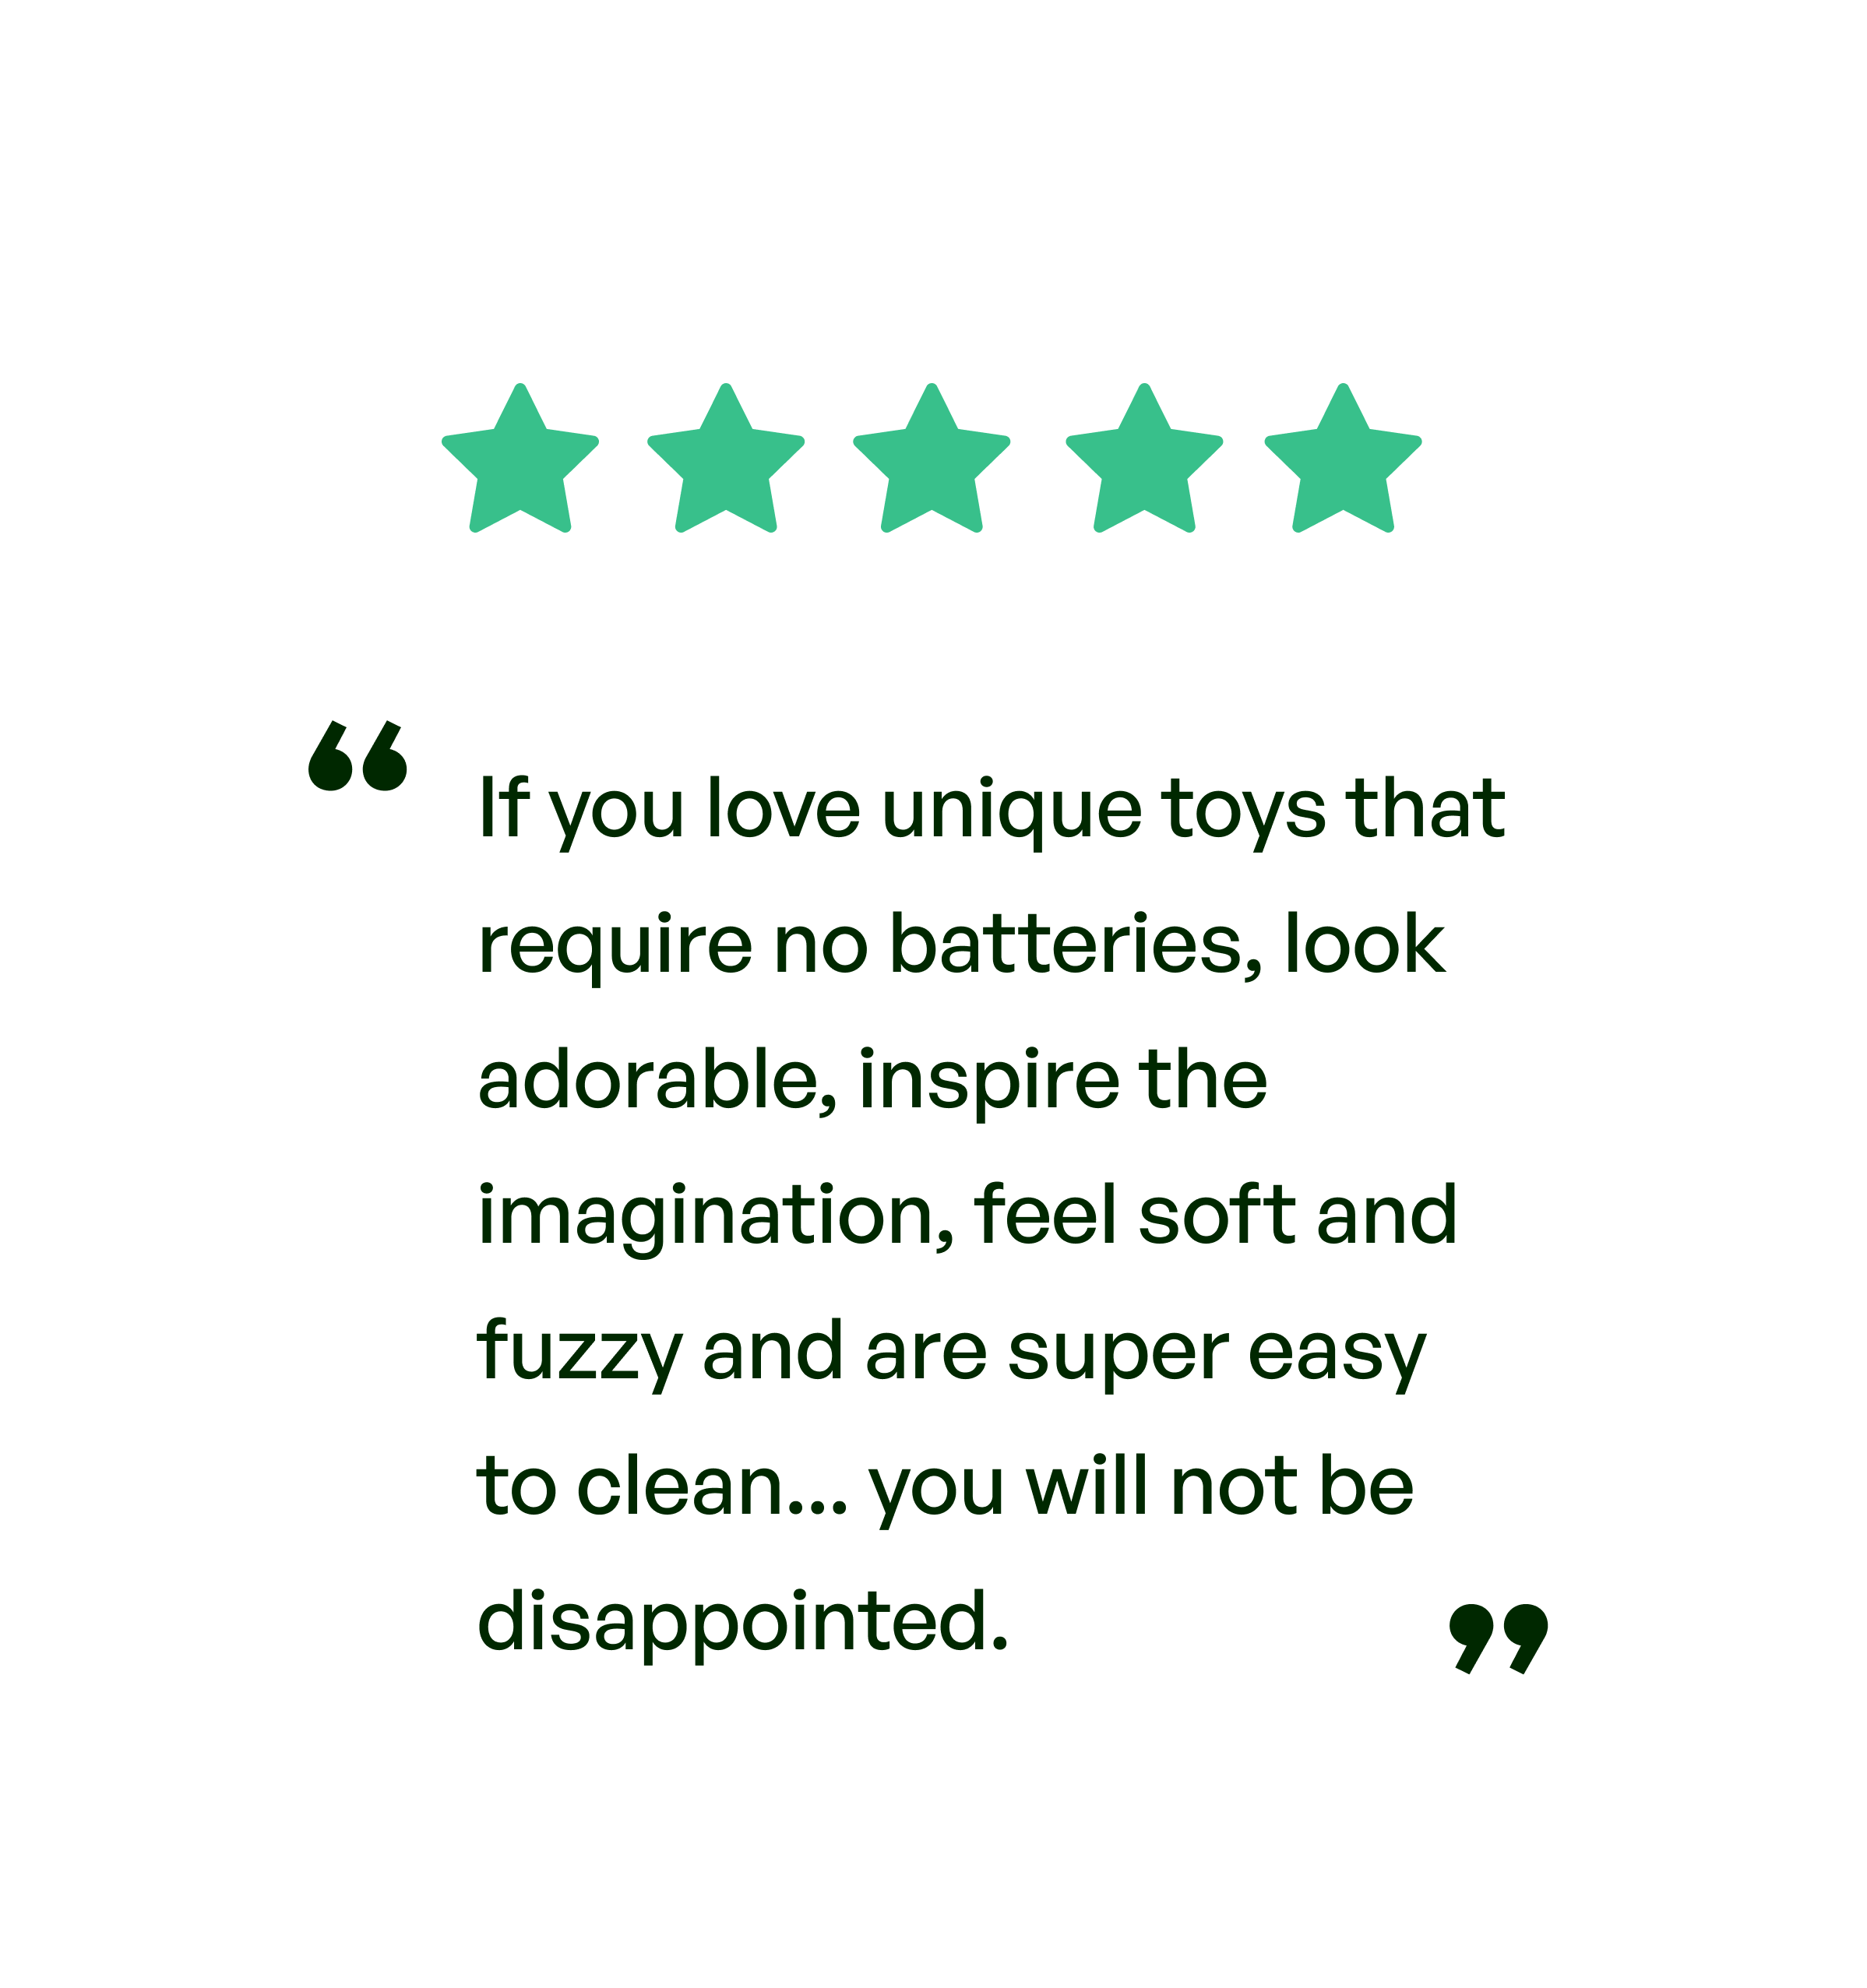 Five stars. Testimonial: If you love unique toys that require no batteries, look adorable, inspire the imagination, feel soft and fuzzy and are super easy to clean... you will not be disappointed.